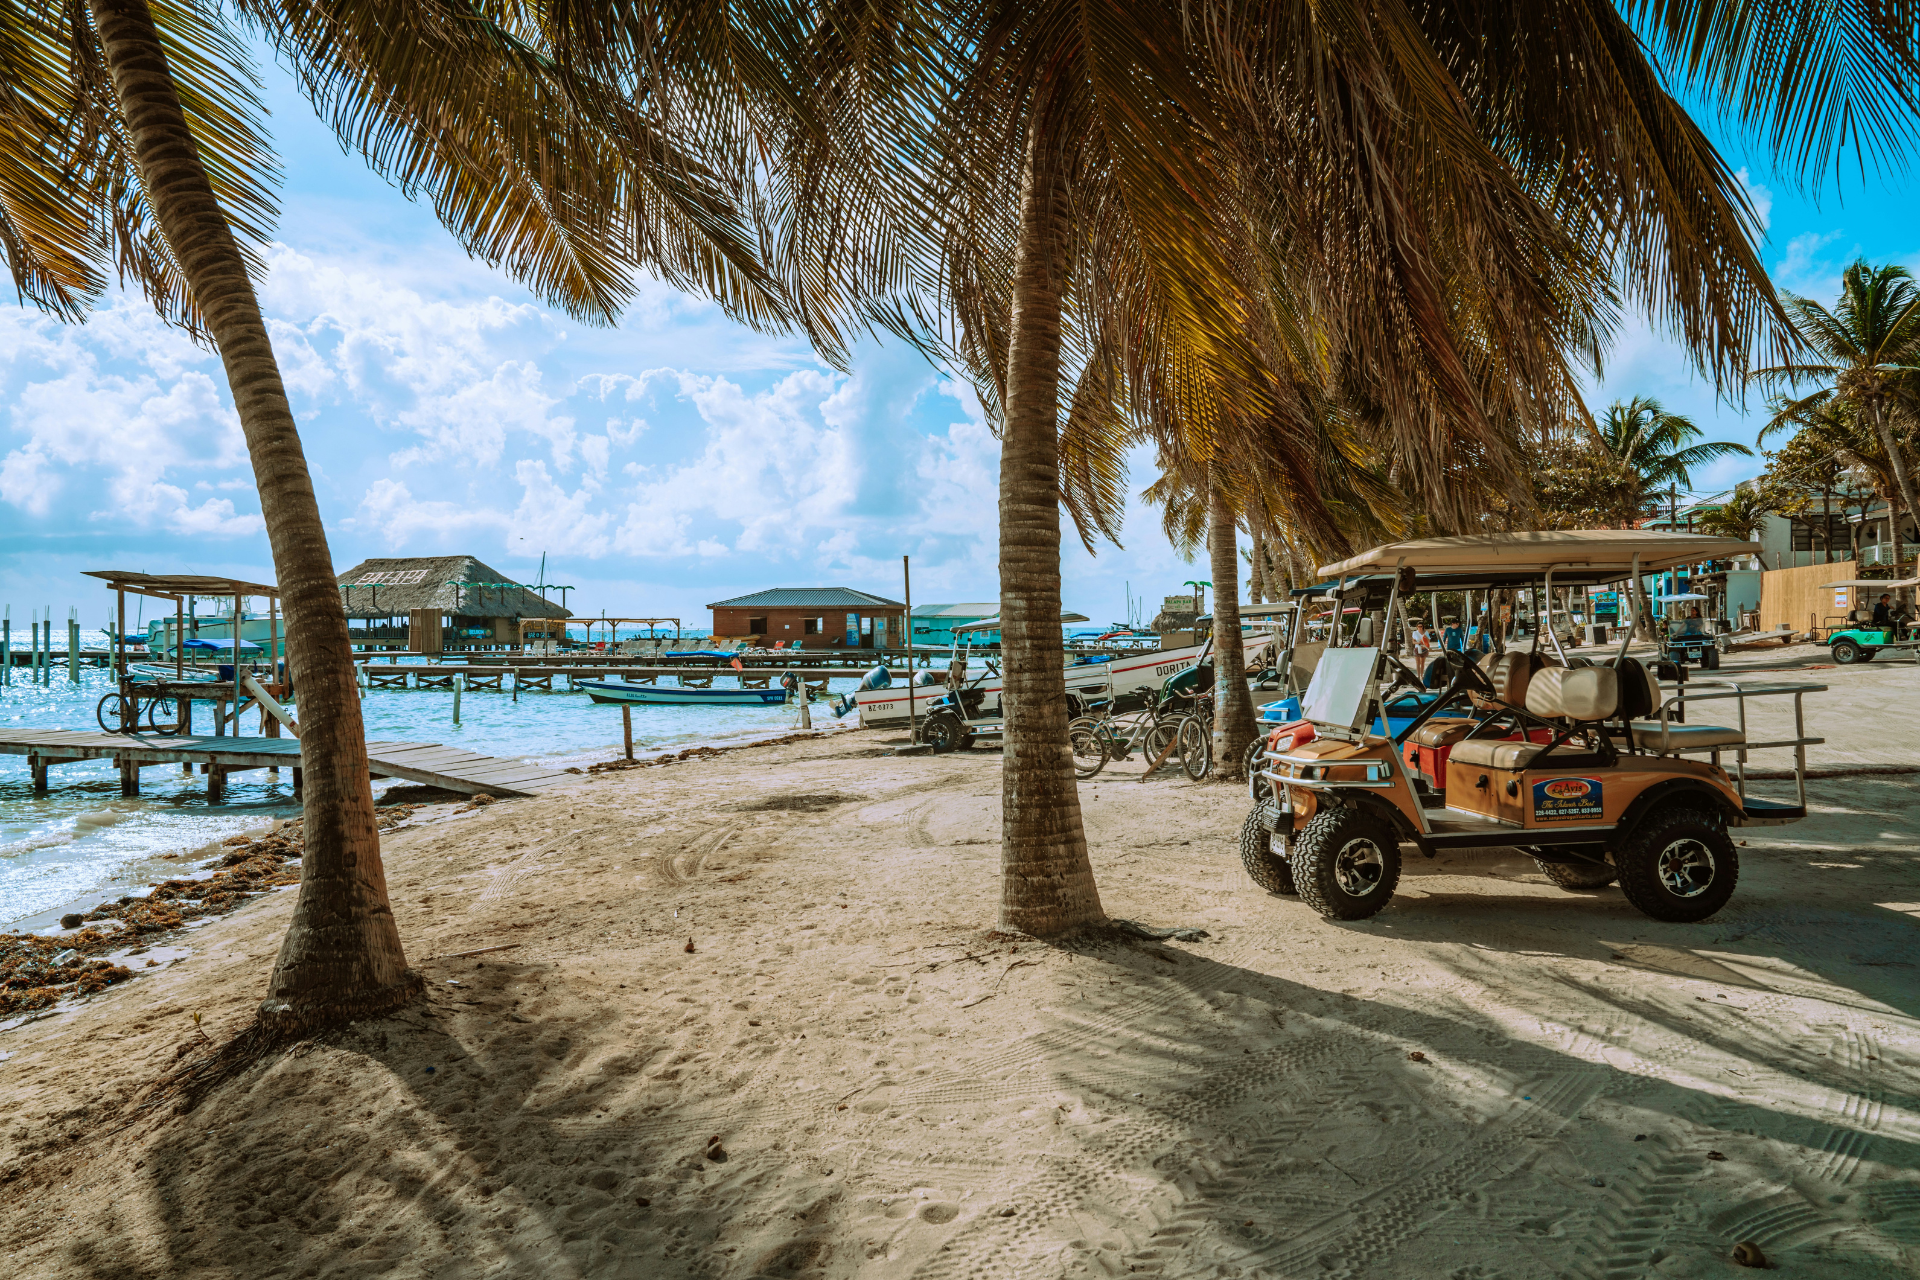 a golf cart is parked on the beach under palm trees .